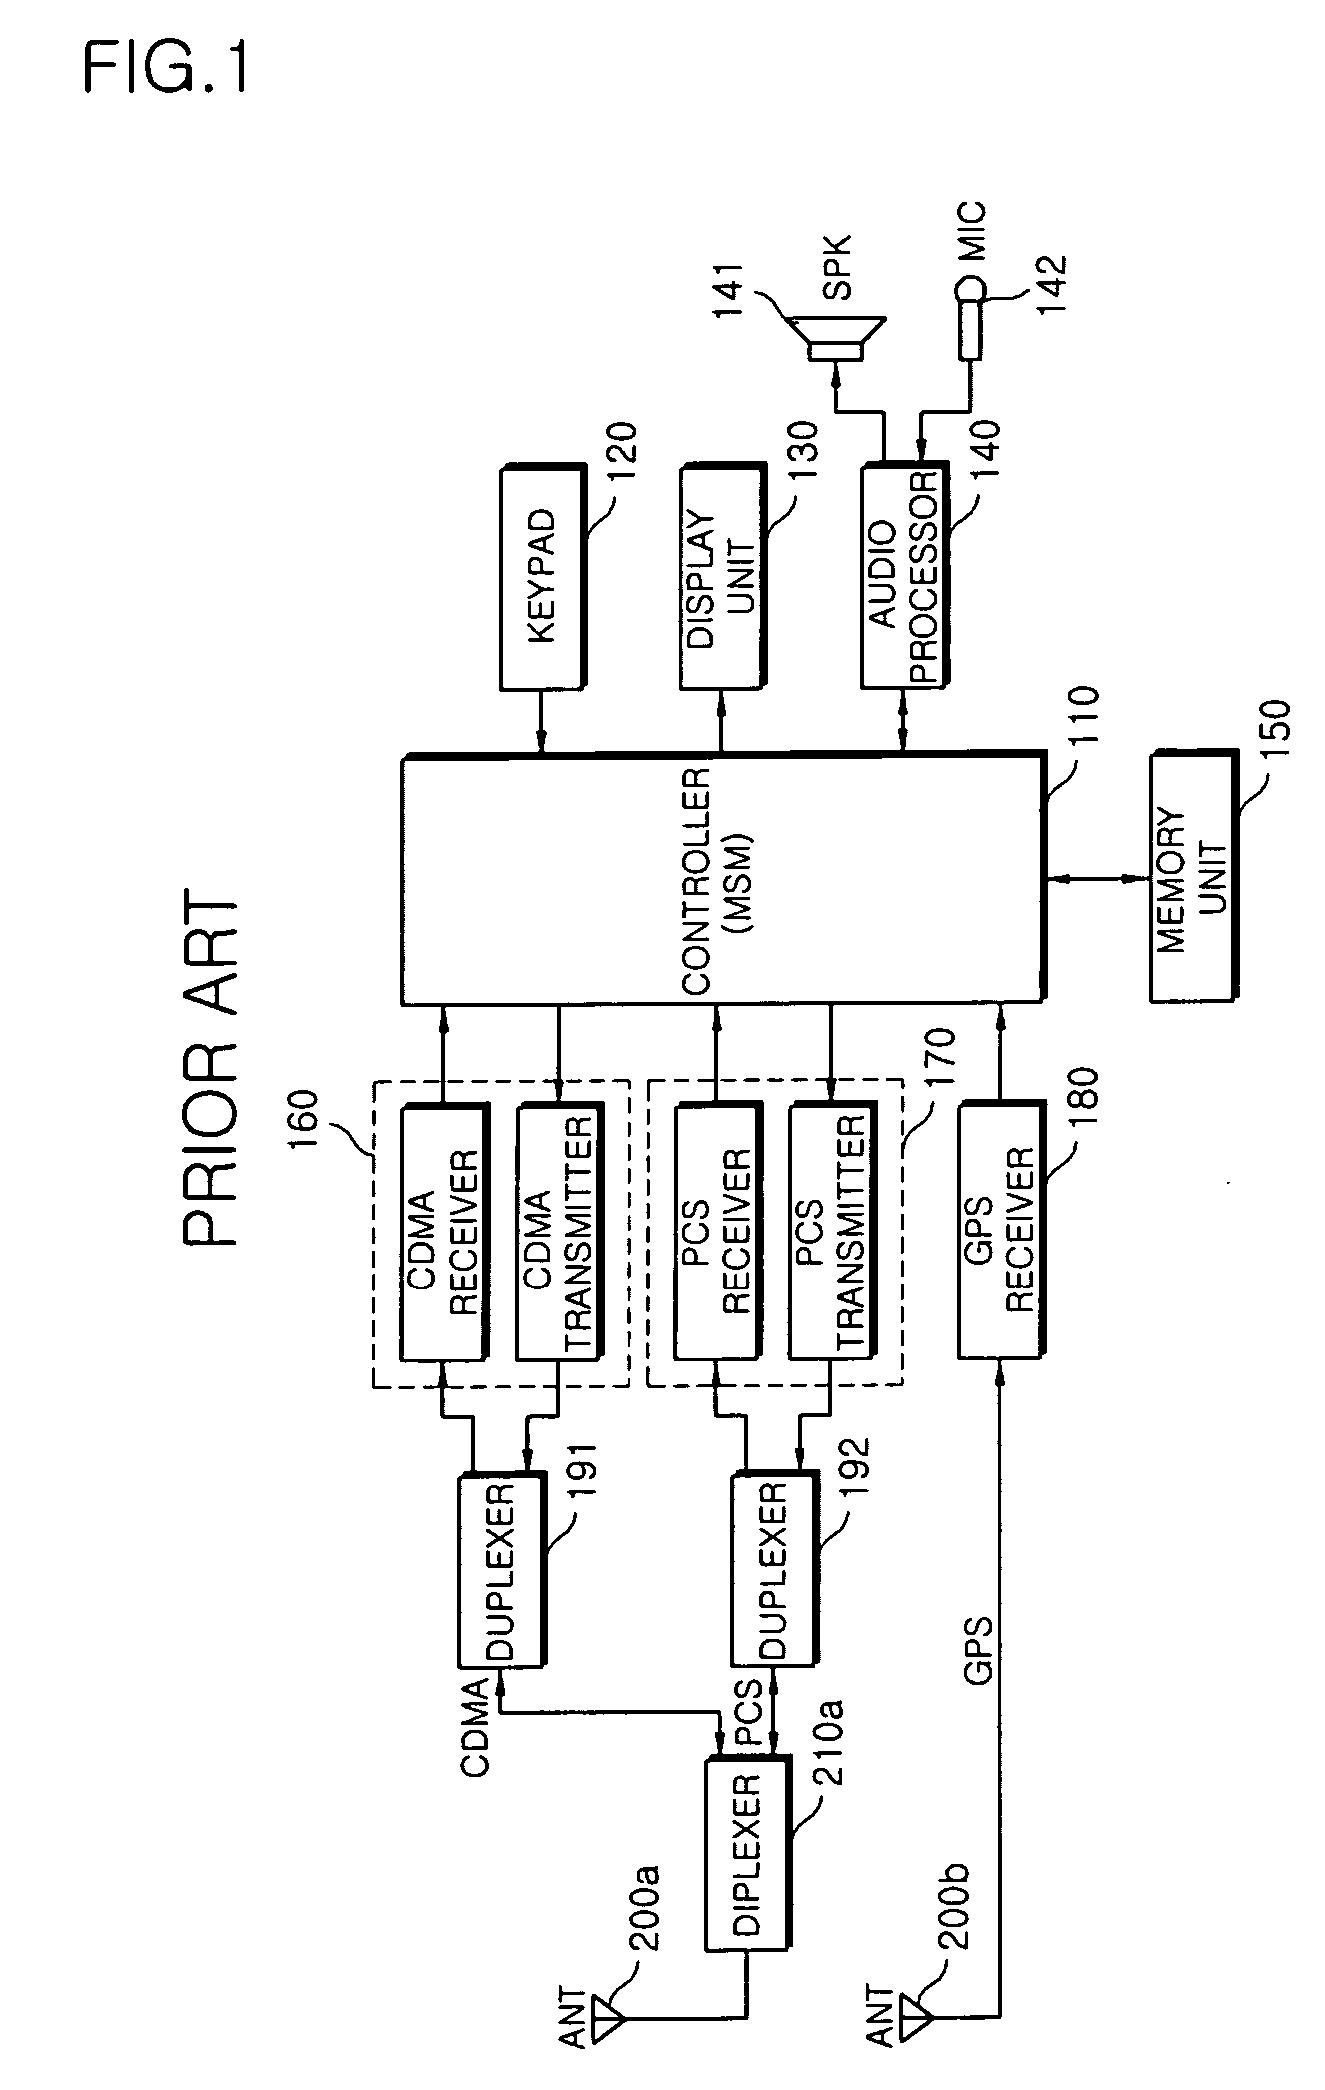 Mobile communication terminal supporting simultaneous GPS